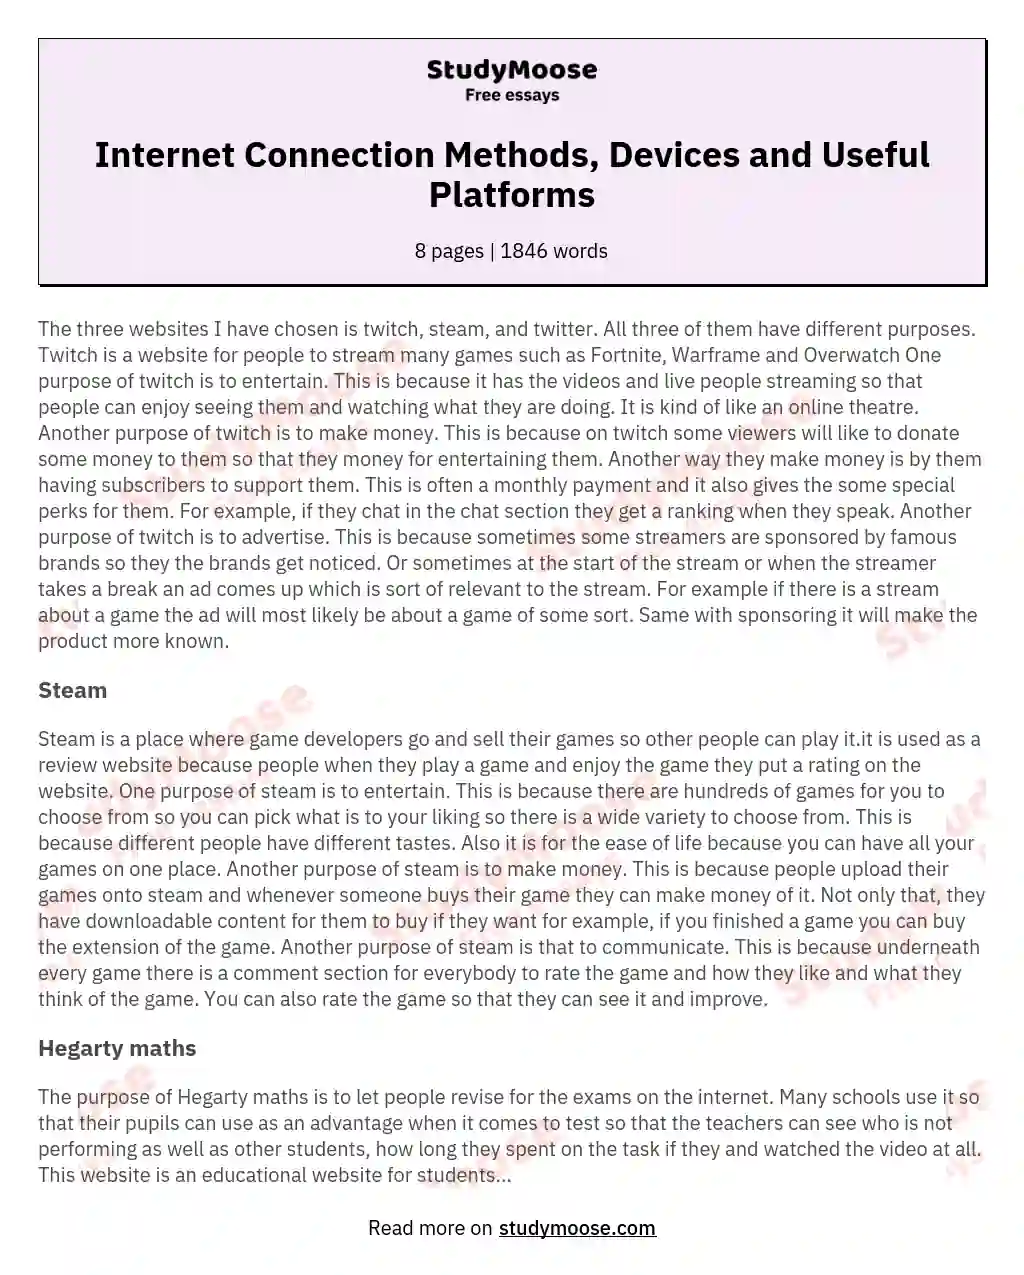 Internet Connection Methods, Devices and Useful Platforms